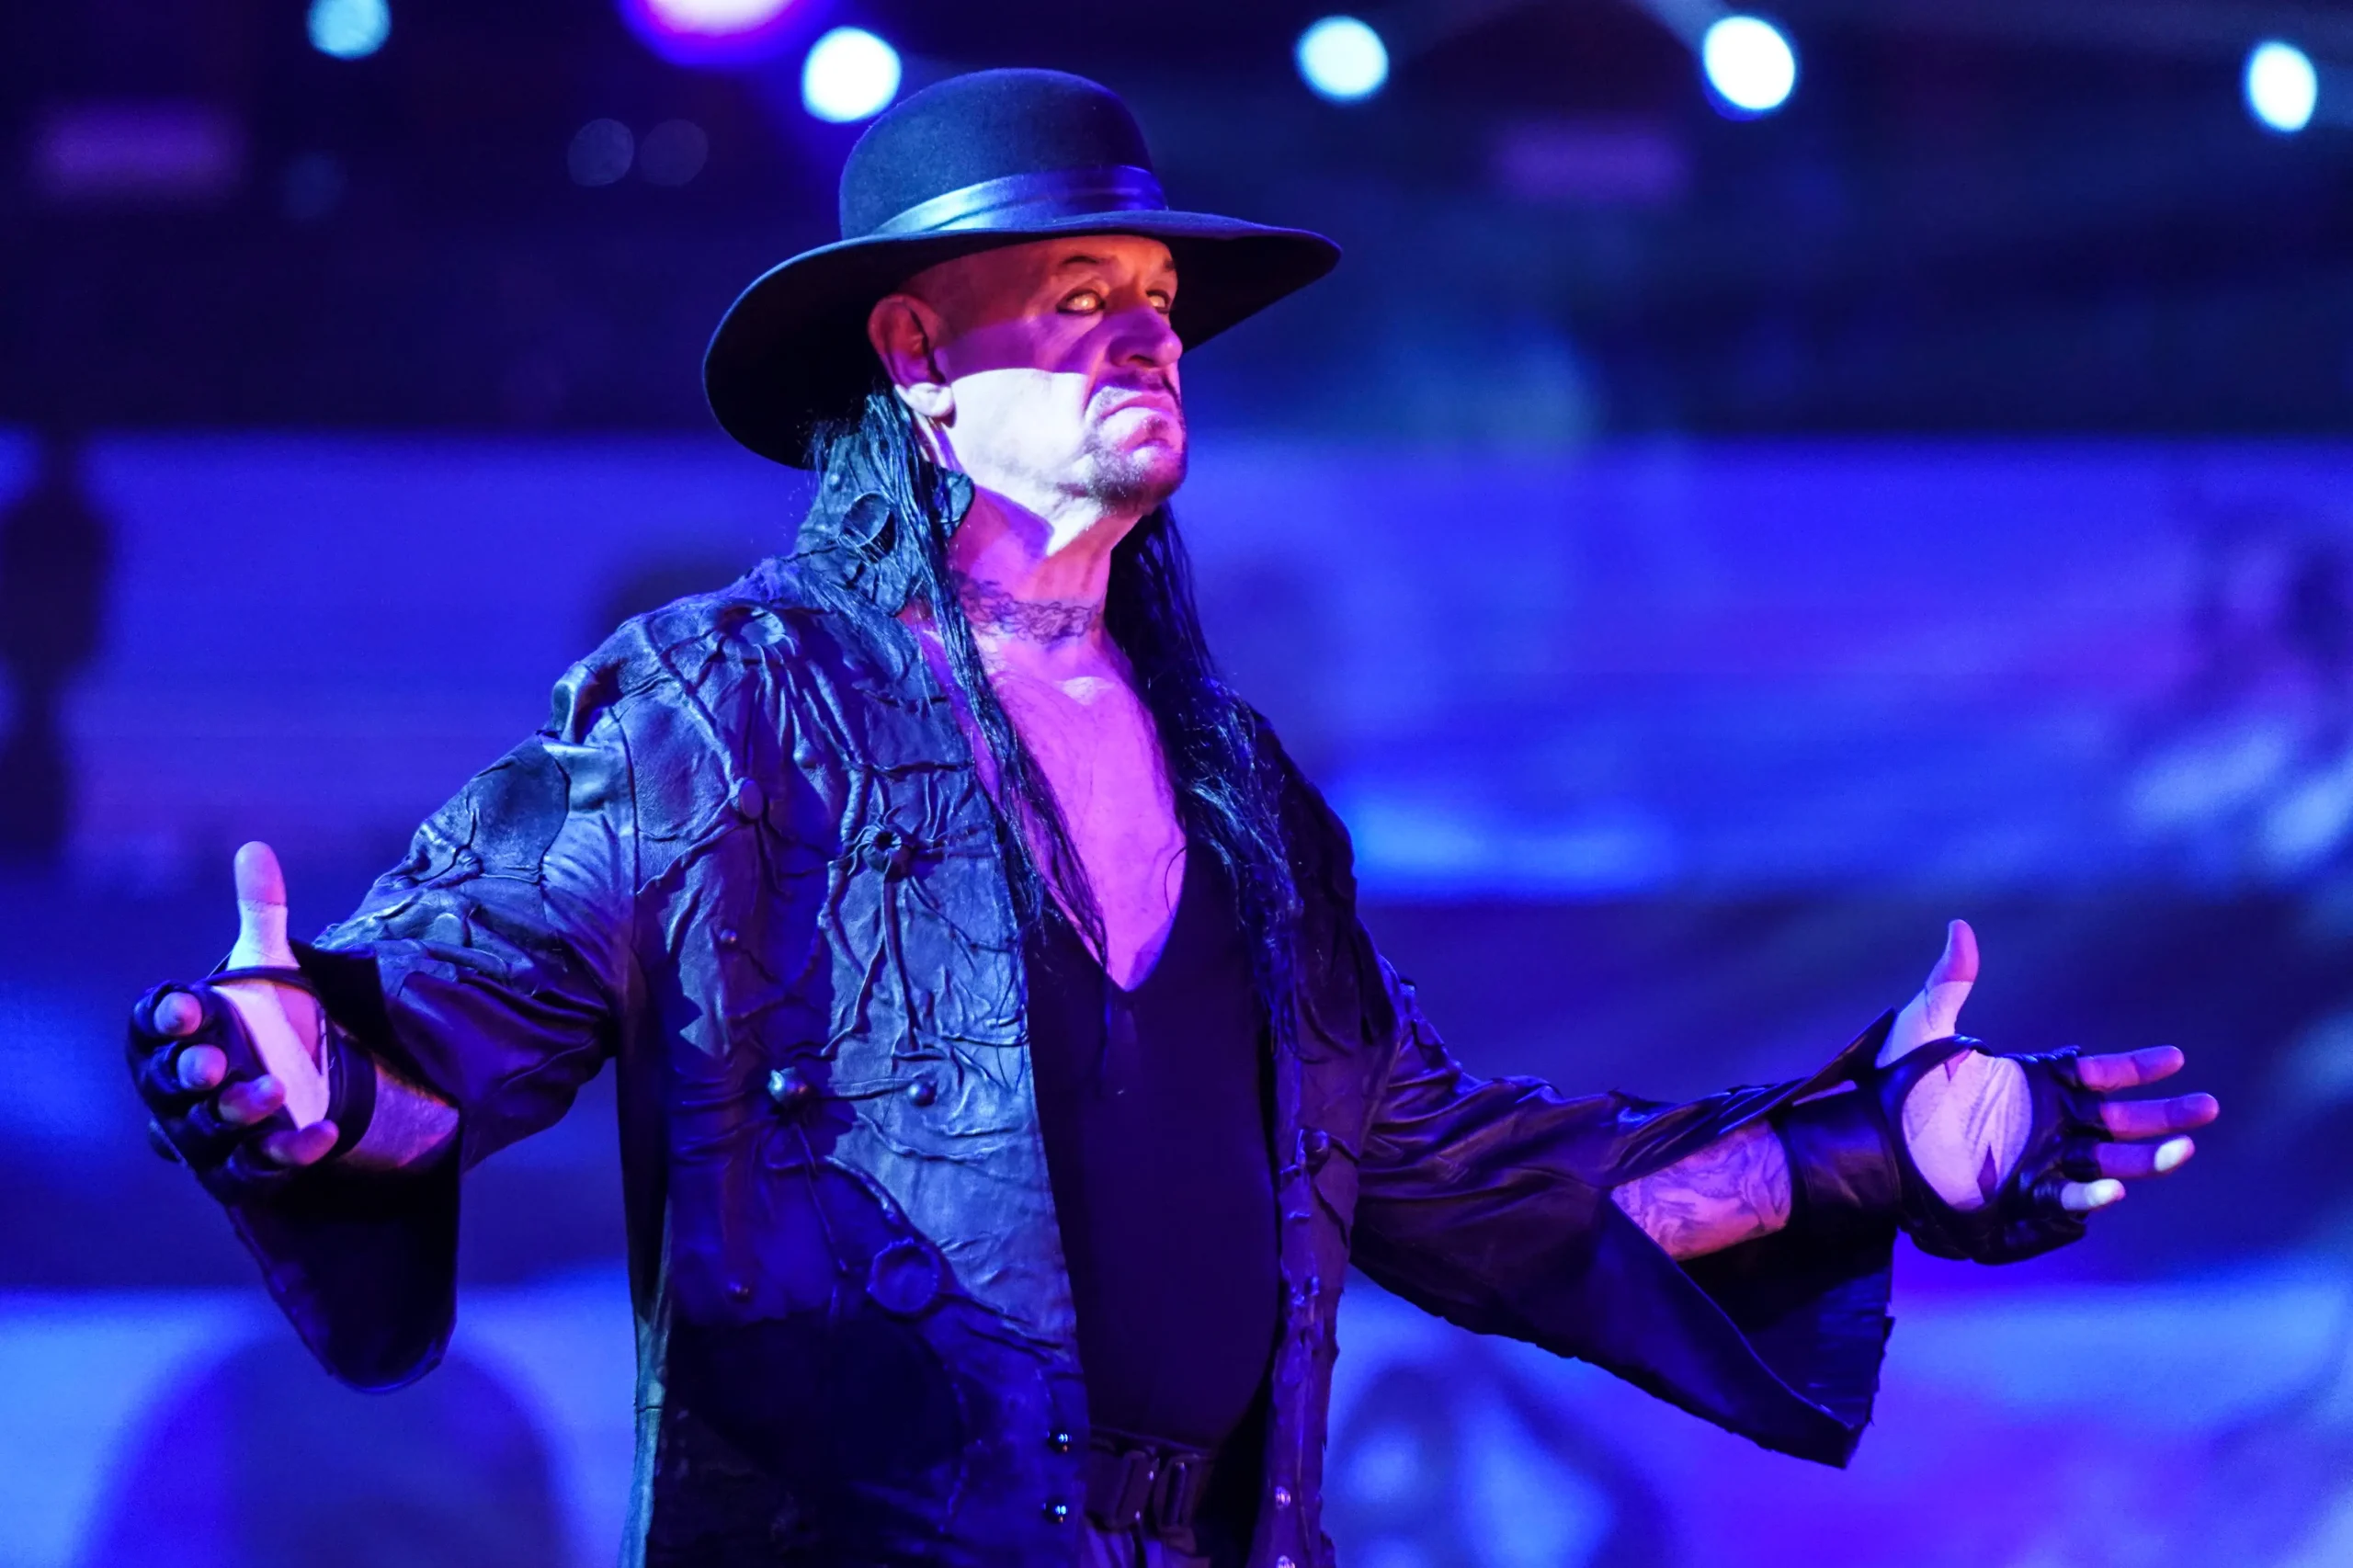 The Undertaker’s Experience Collaborating with Jake Roberts & Mick Foley in WWE